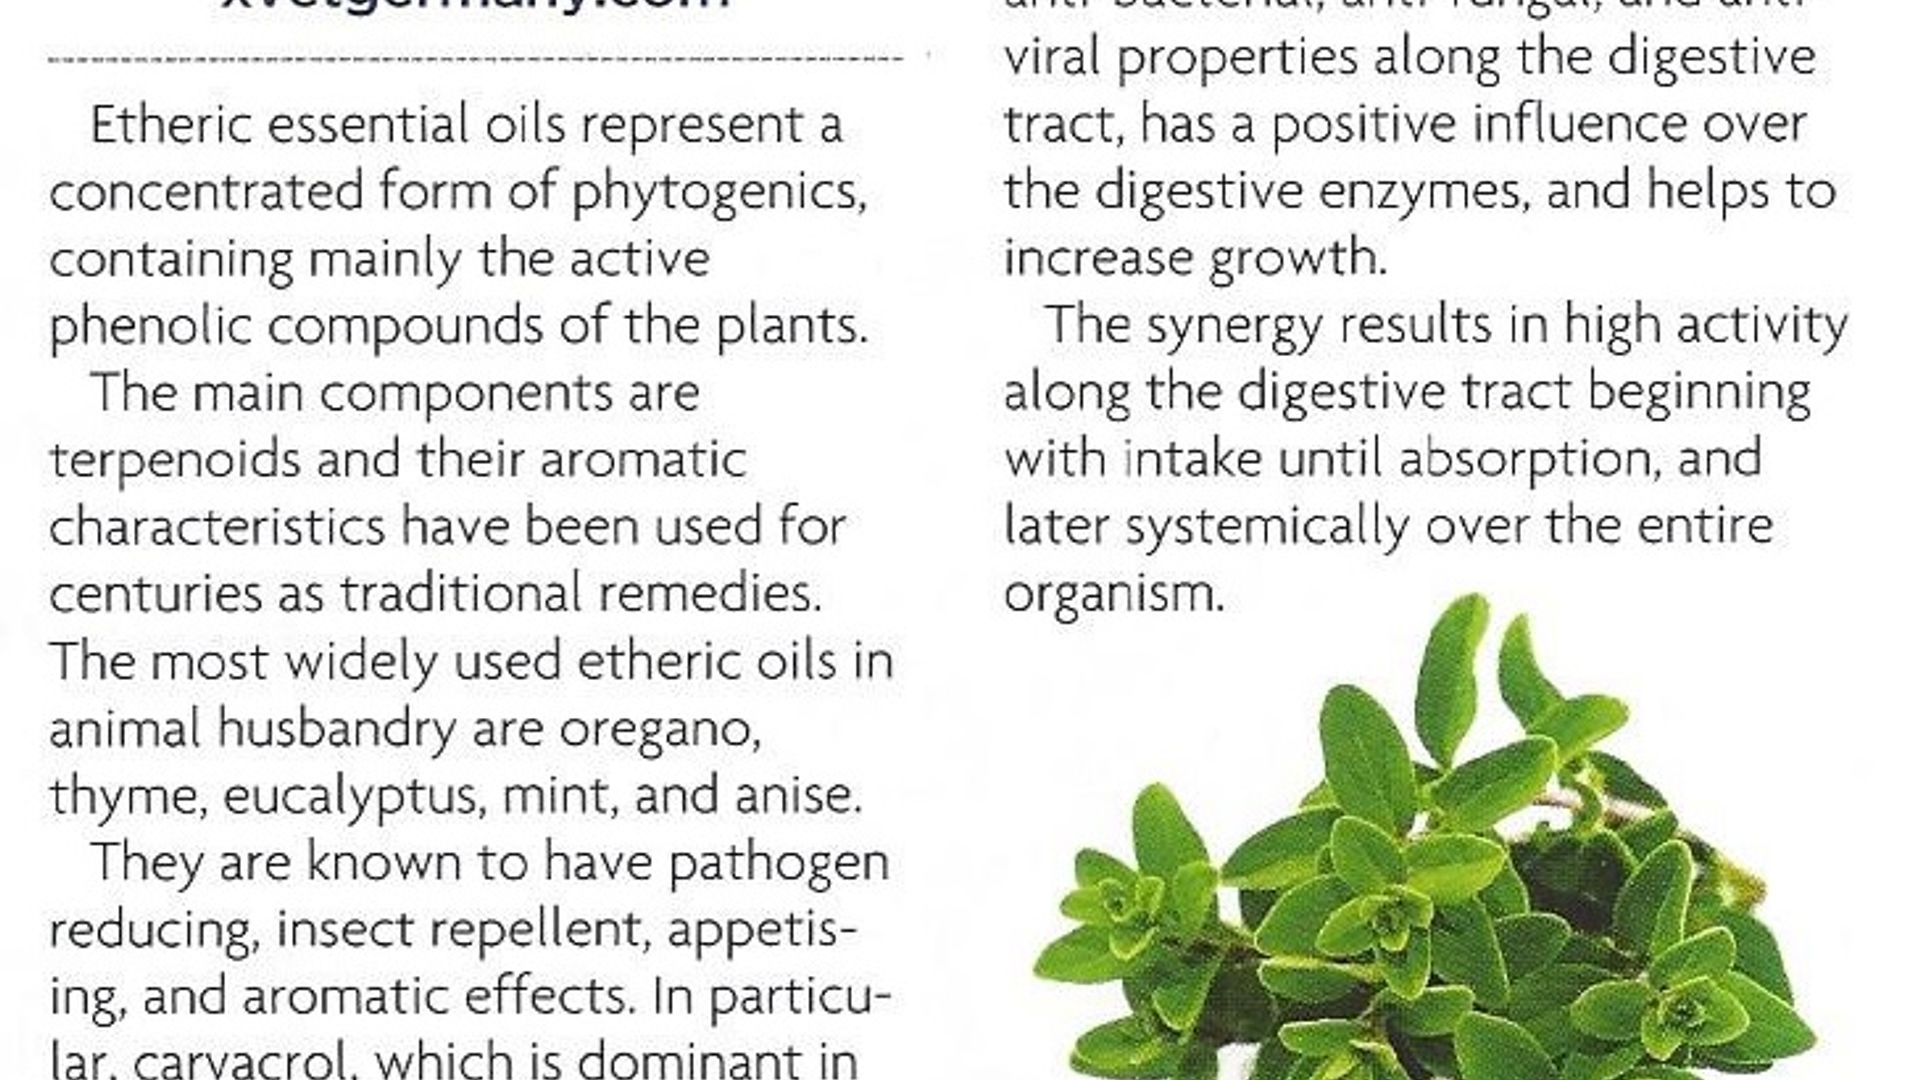 Article on Essential Oils and the search for the perfect alternative